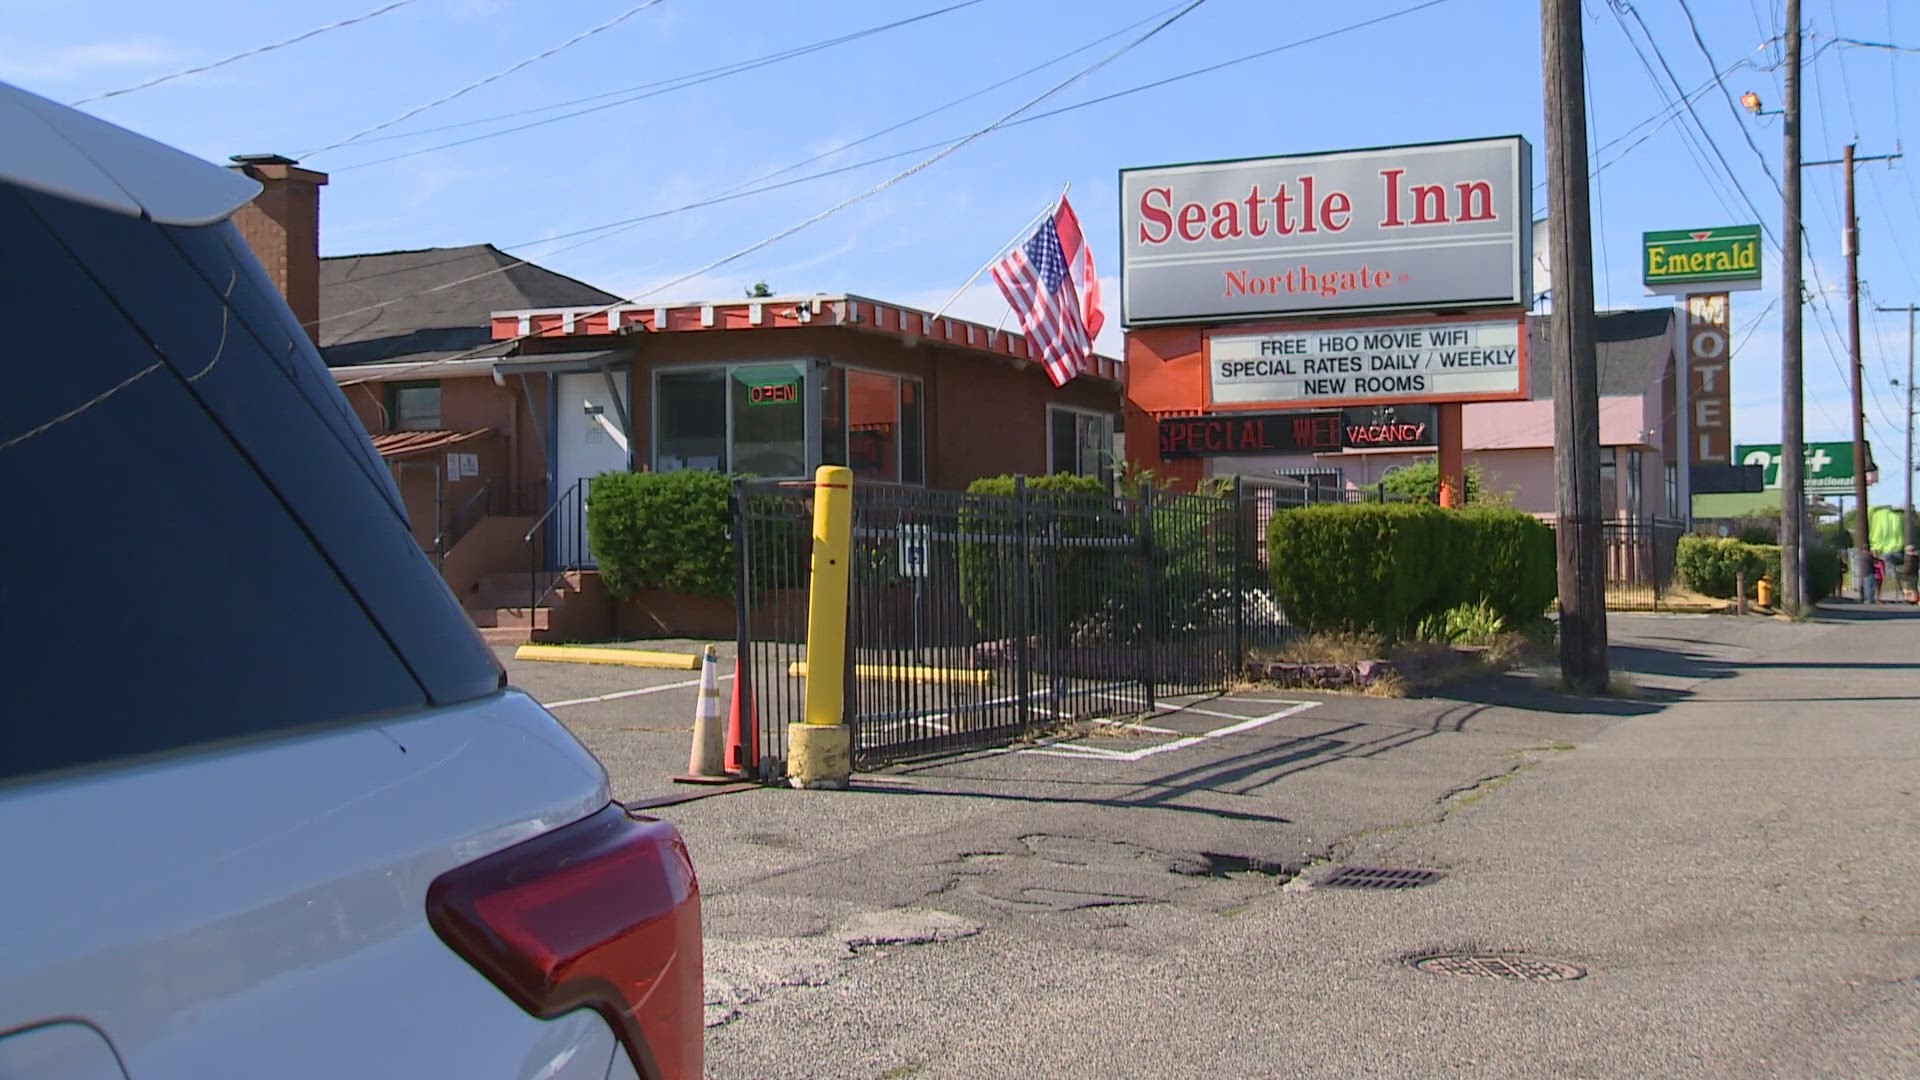 People who live and work nearby the Seattle Inn and Emerald Motel say they are a major problem.